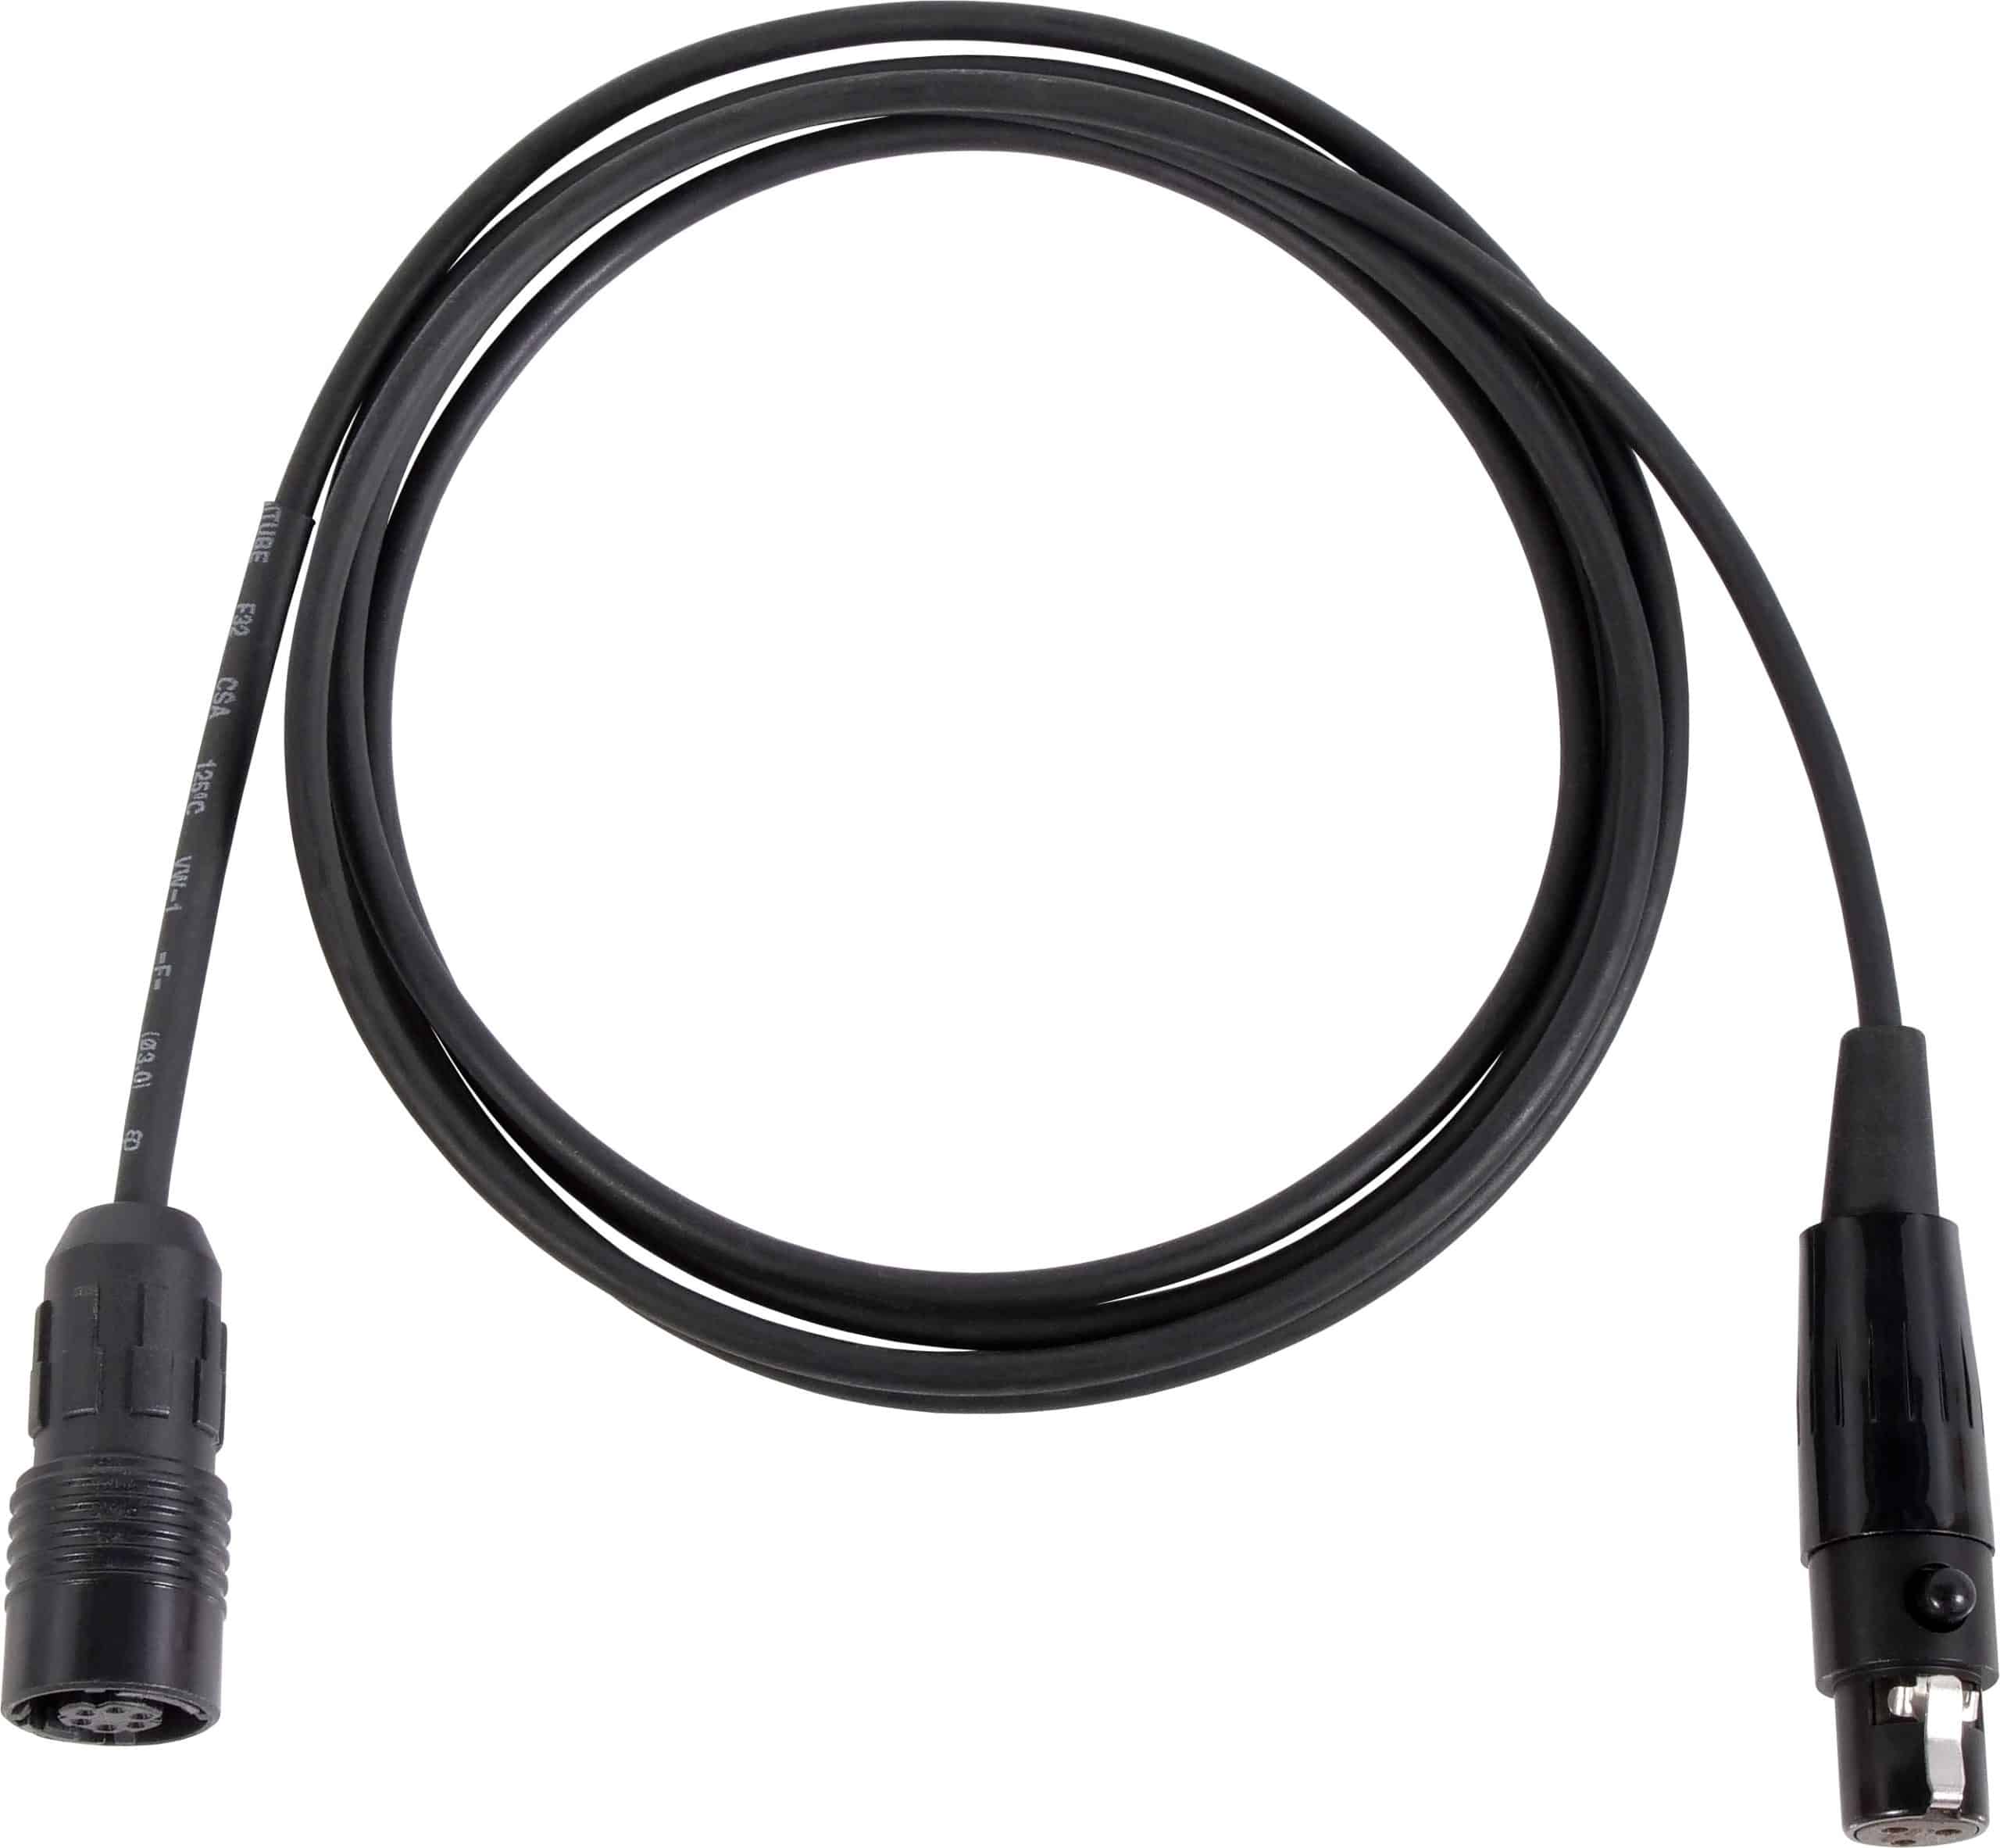 Replacement cable for H2O7 Wireless Headset Mic. The cable is wired to work with Galaxy Audio® systems.